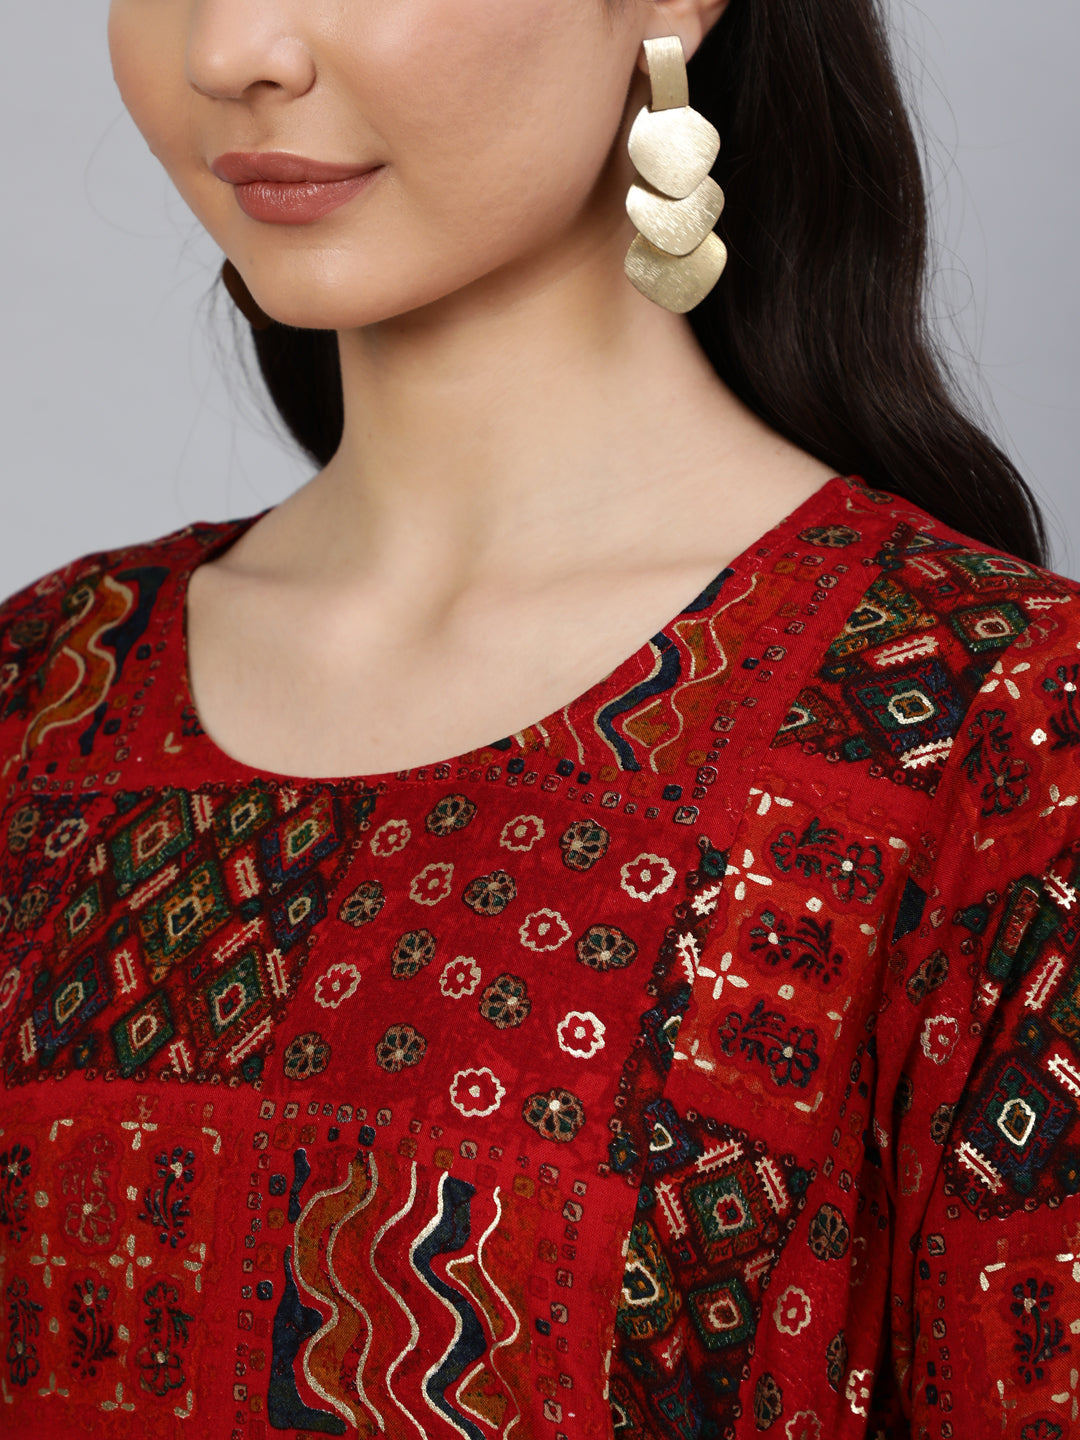 Women's Red Printed Dress With Three Quarter Sleeves - Nayo Clothing